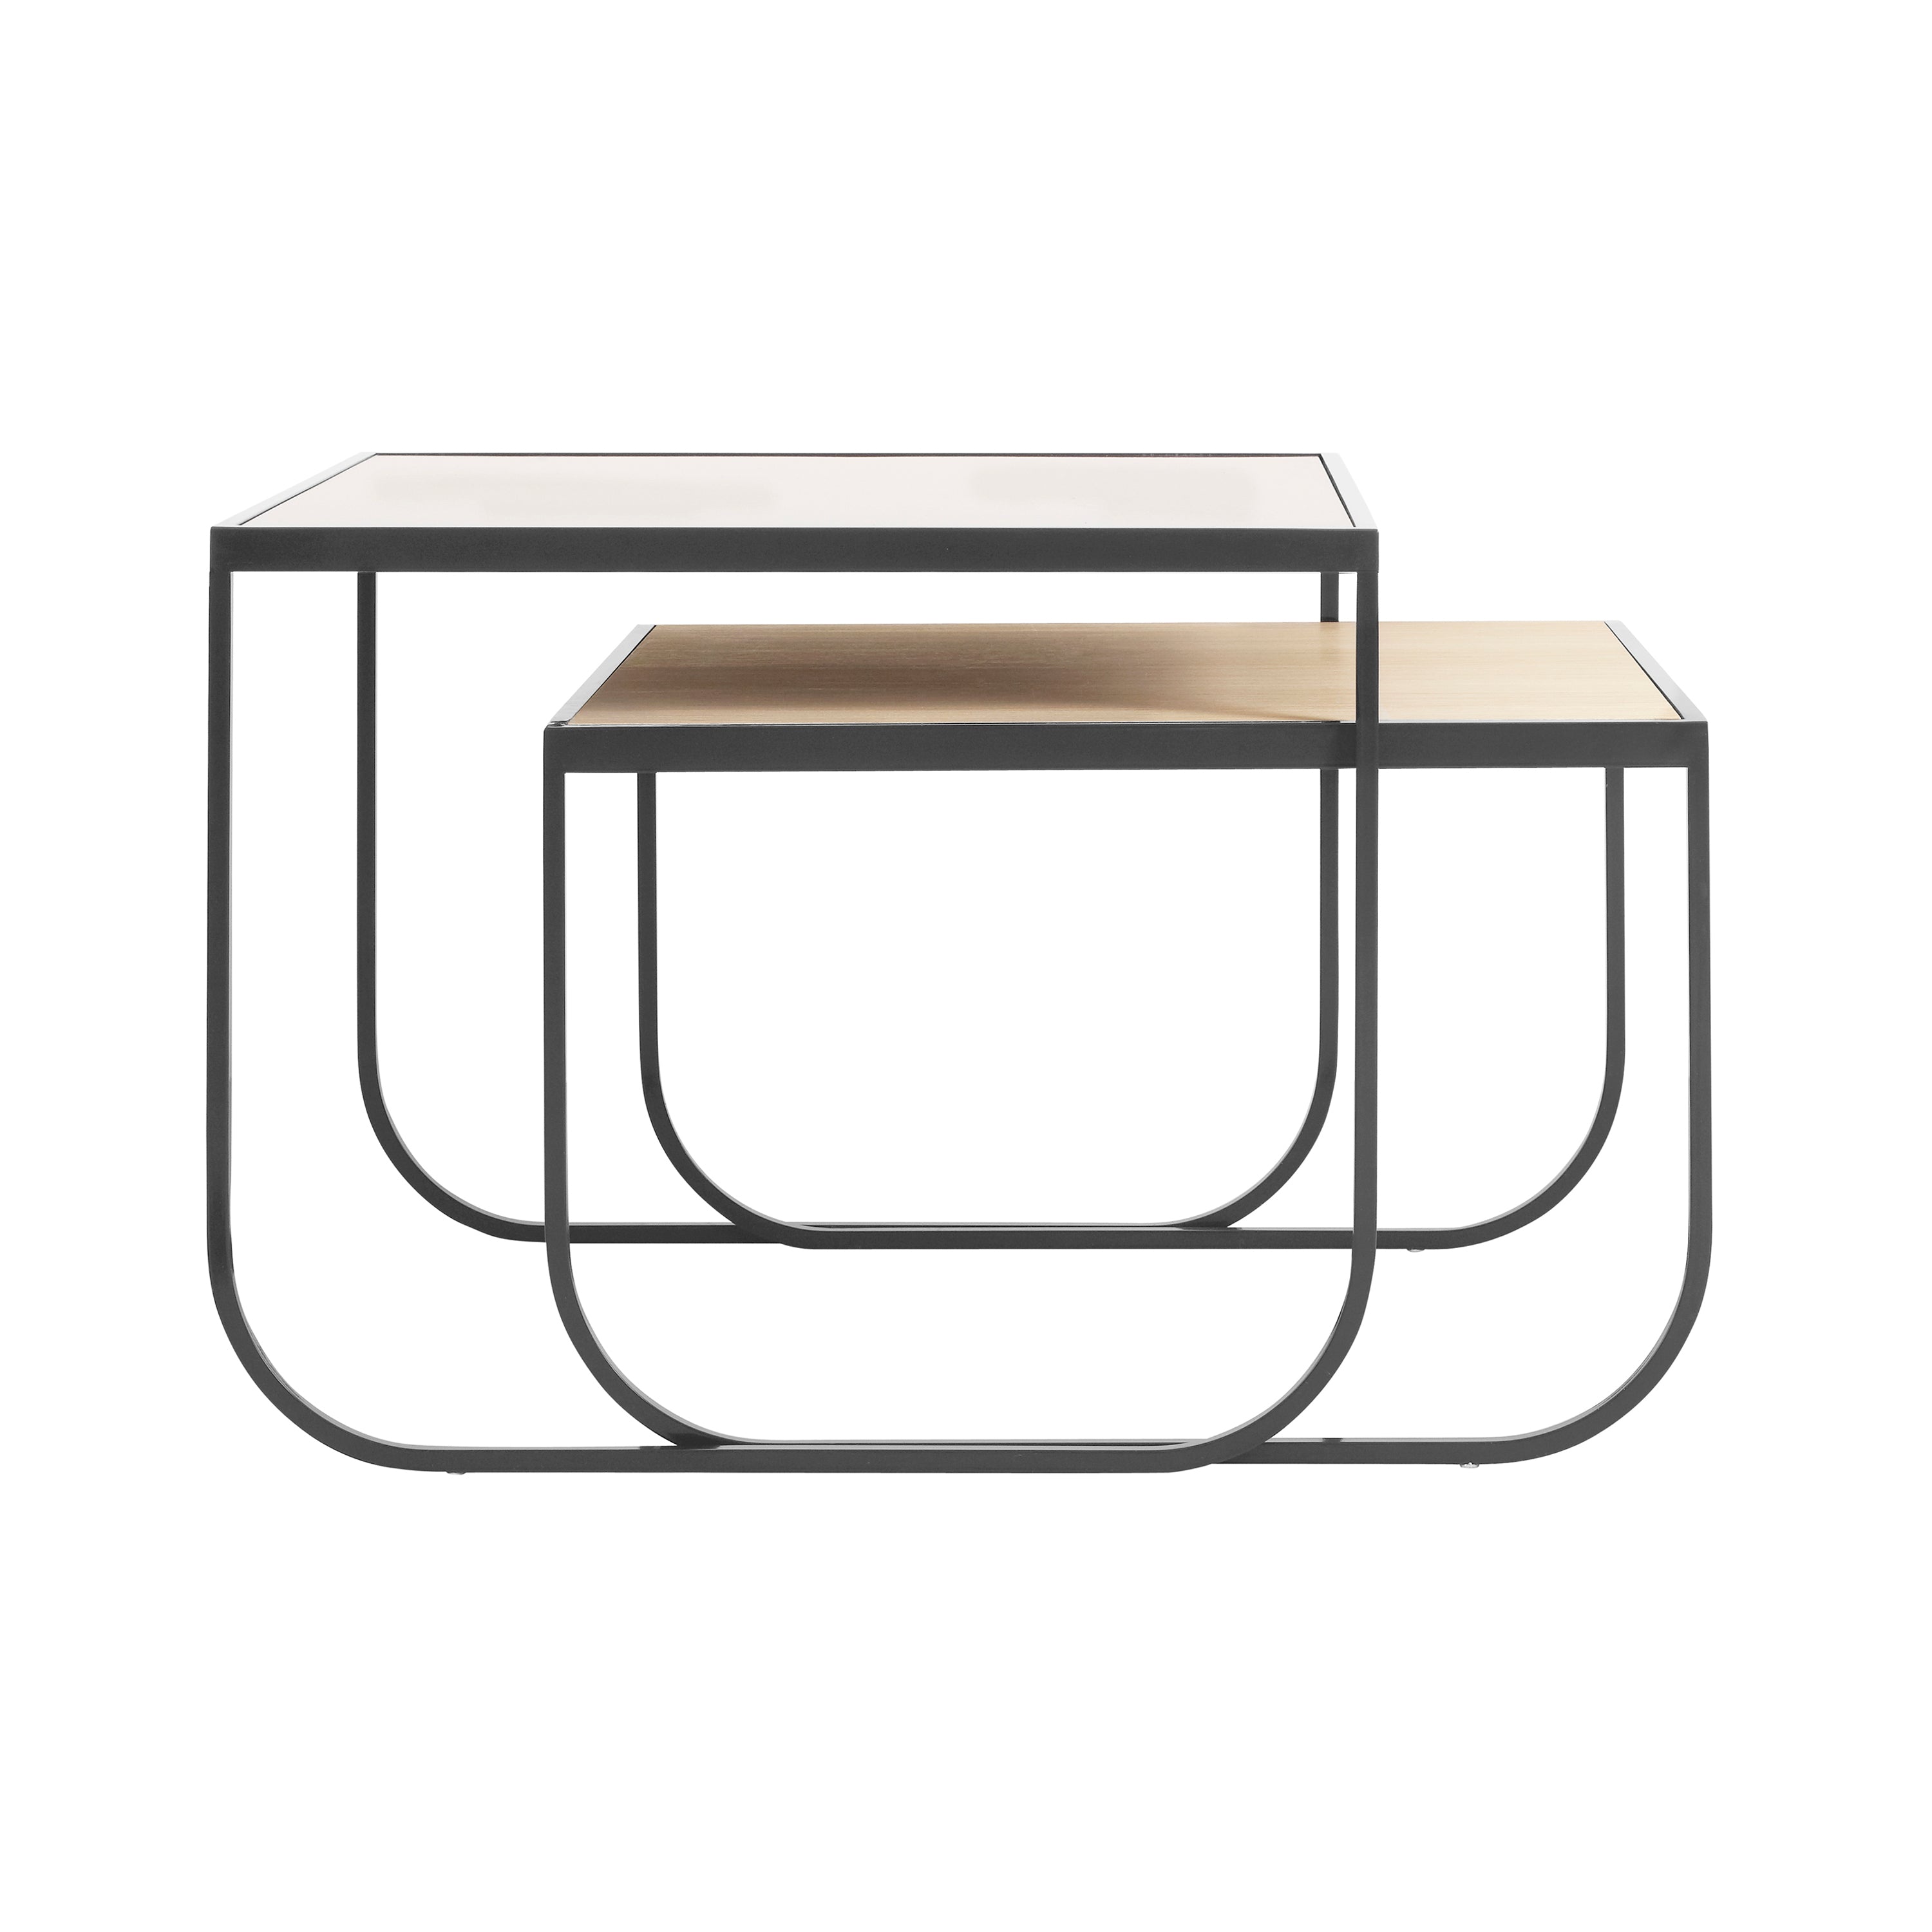 Tati Coffee Table: Square + Wood Top + High + Low + White Stained Oak + Storm Grey